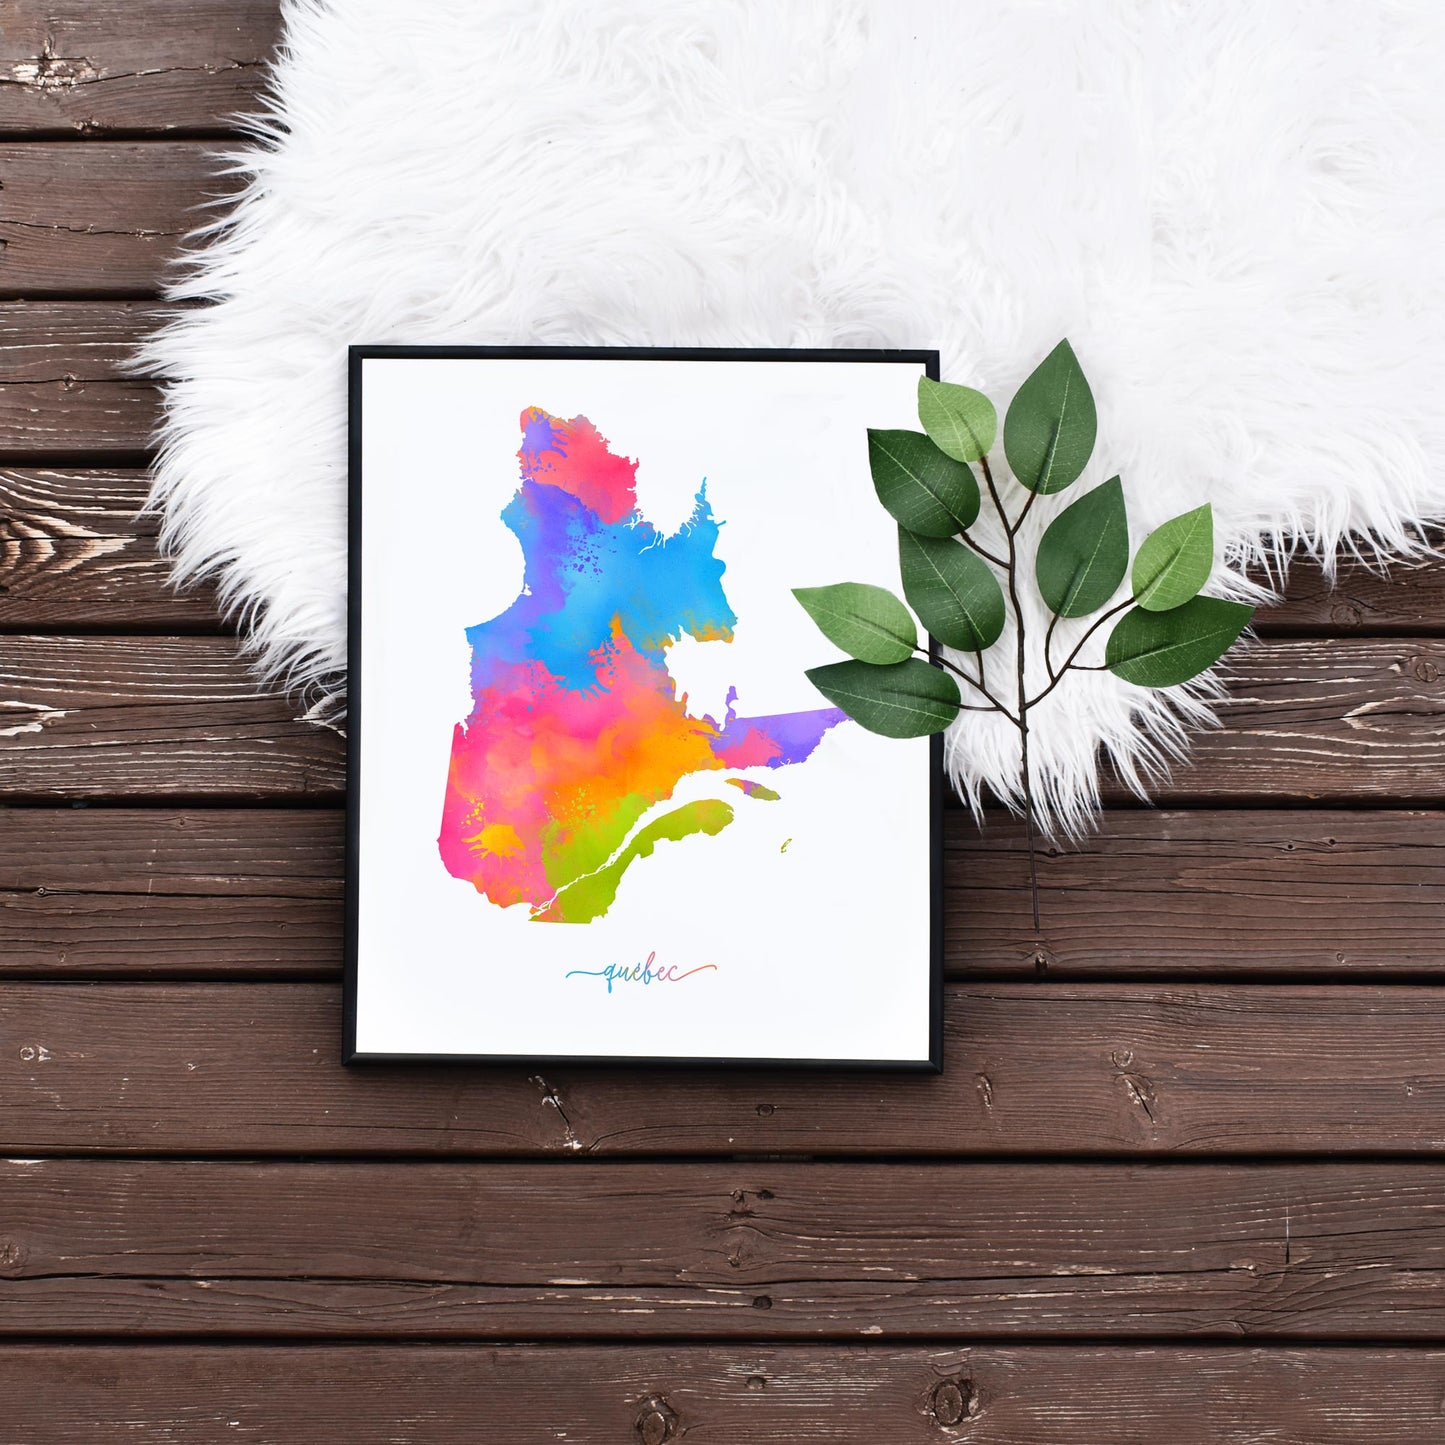 Colourful Quebec Map Art Printable by Playful Pixie Studio